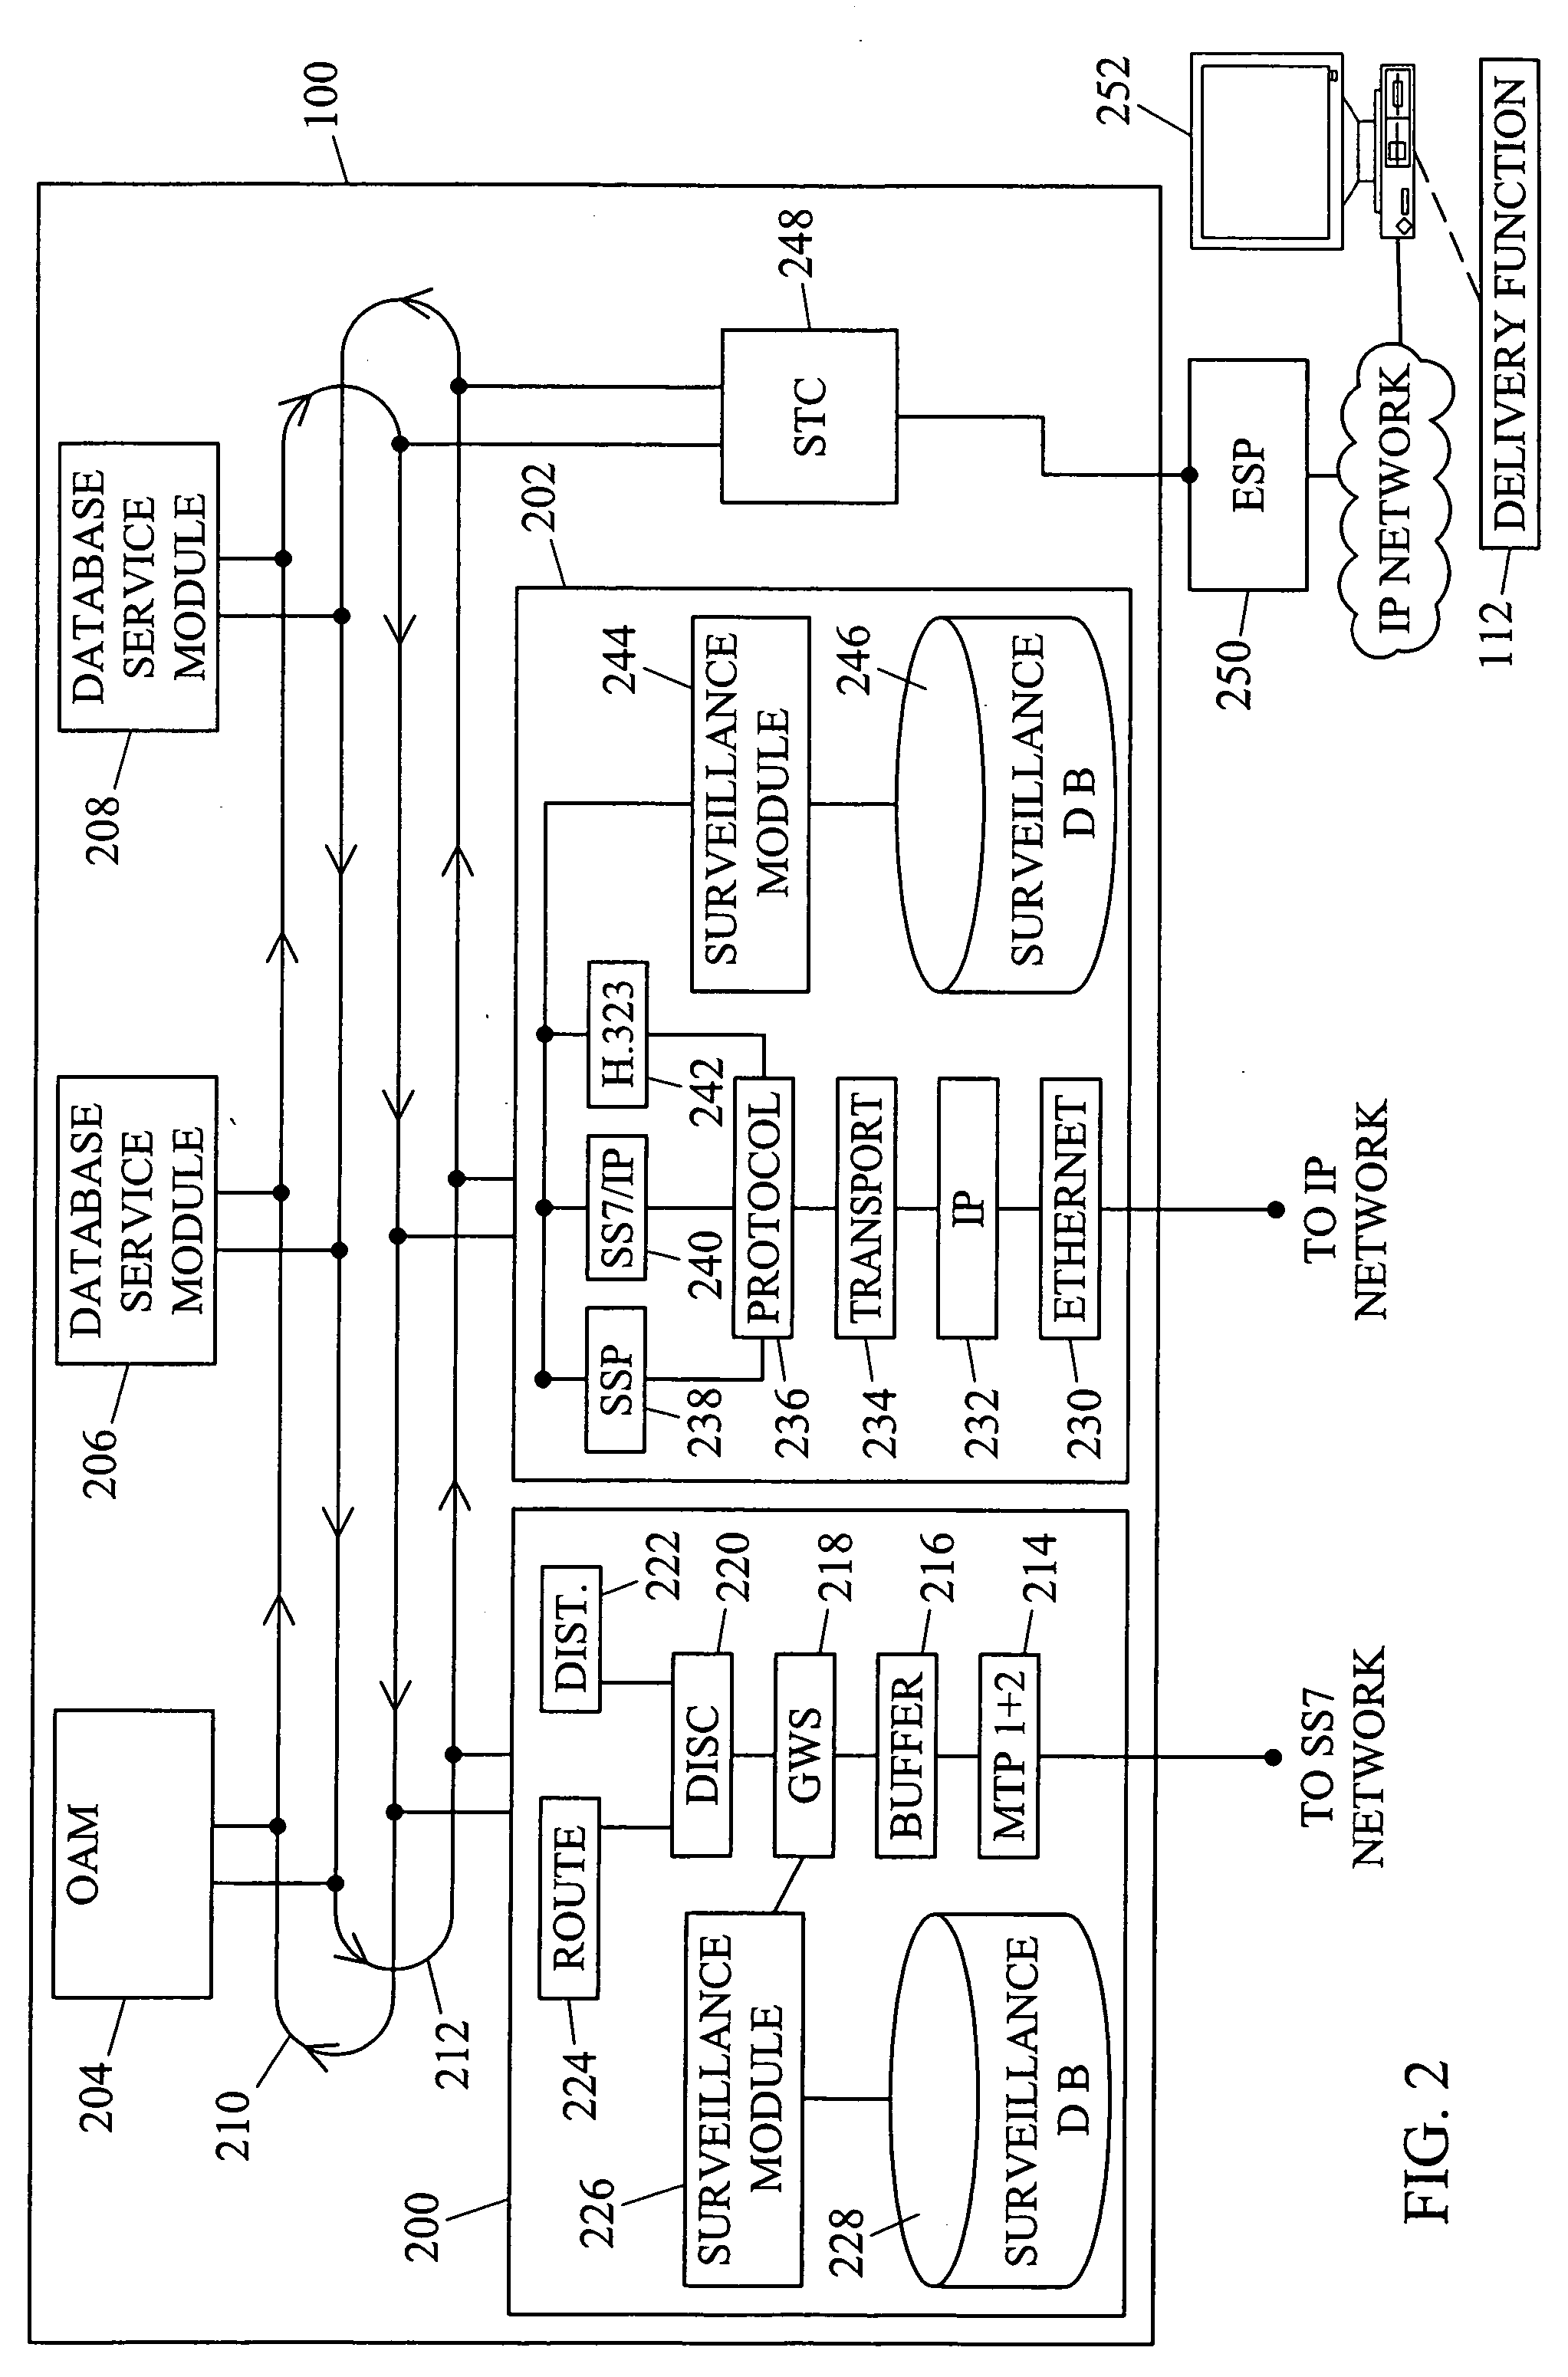 Method and systems for intelligent signaling router-based surveillance